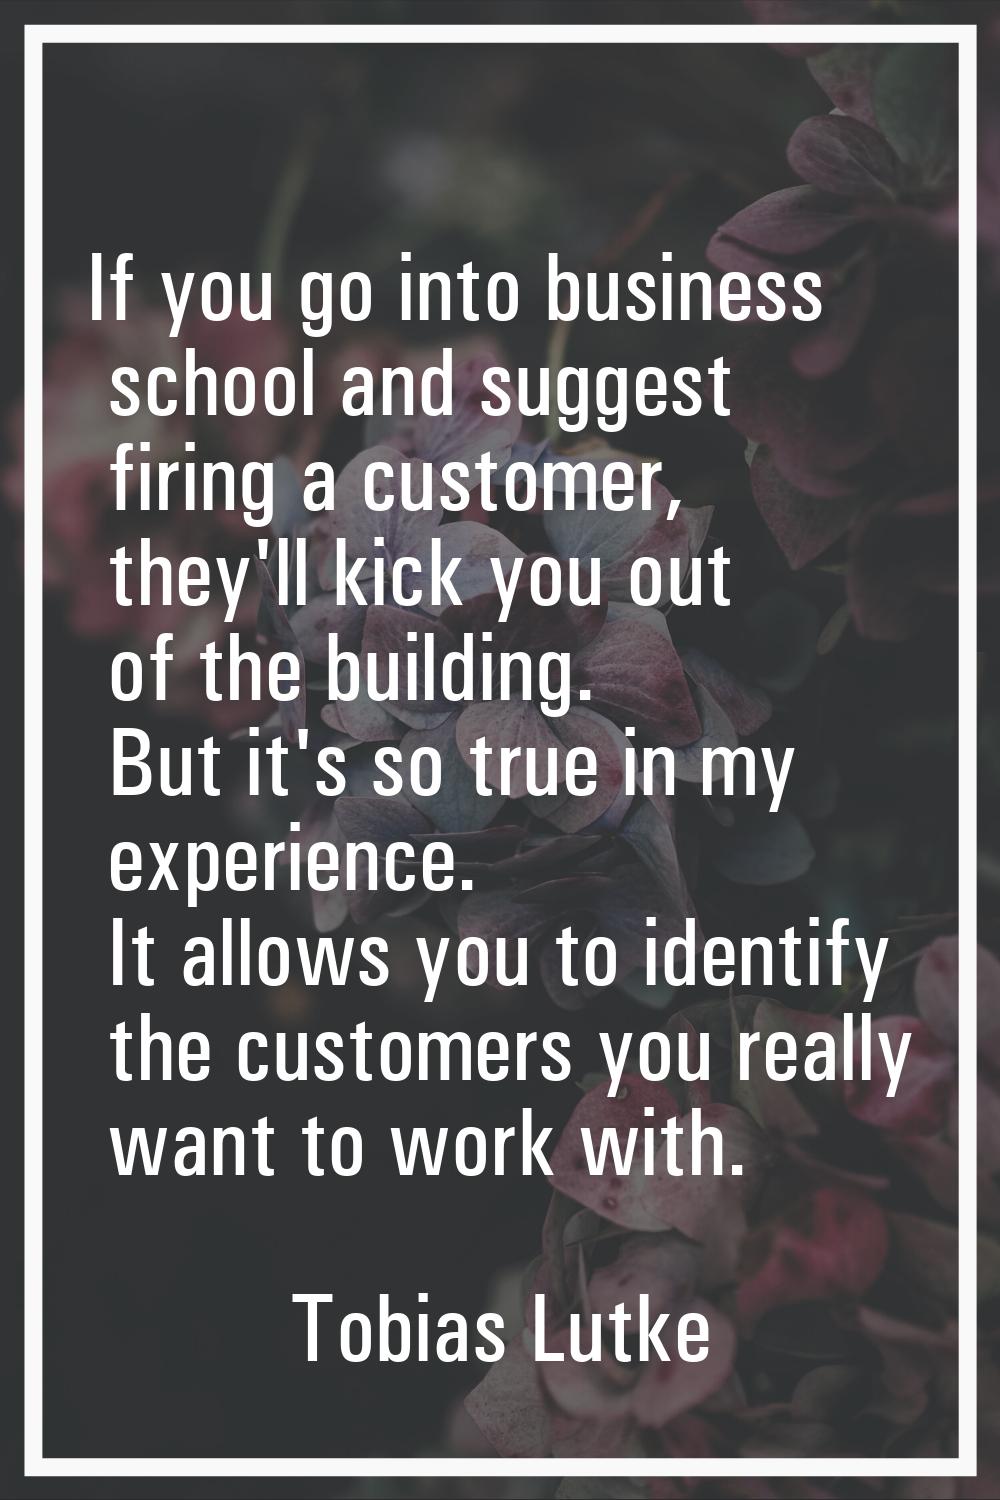 If you go into business school and suggest firing a customer, they'll kick you out of the building.